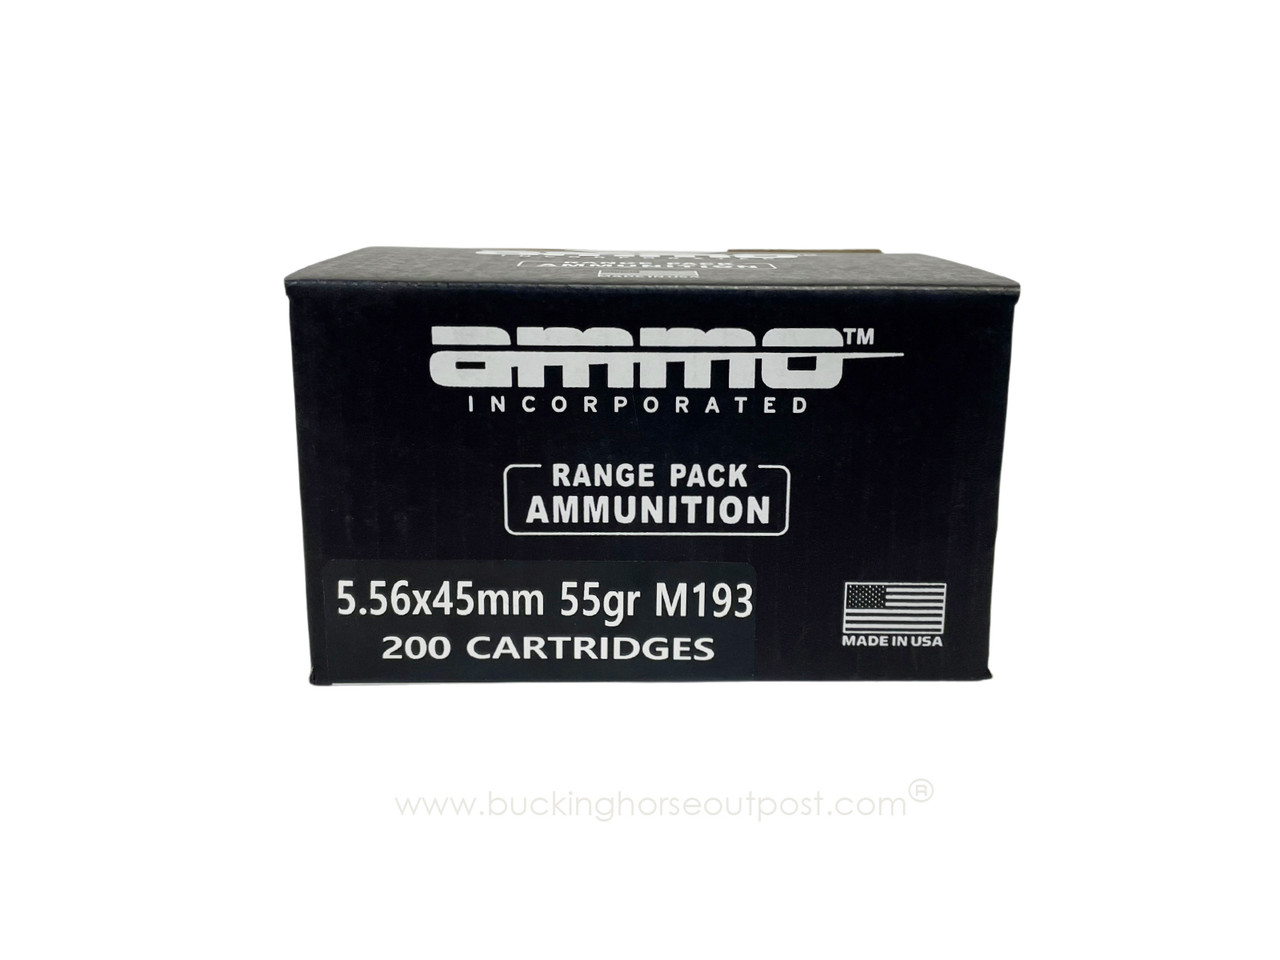 Ammo Inc. Signature  M193 5.56x45mm 55 Grain Full Metal Jacket 200rds Per Range Pack  (556055M193-A200) - FREE SHIPPING ON ORDERS OVER $175